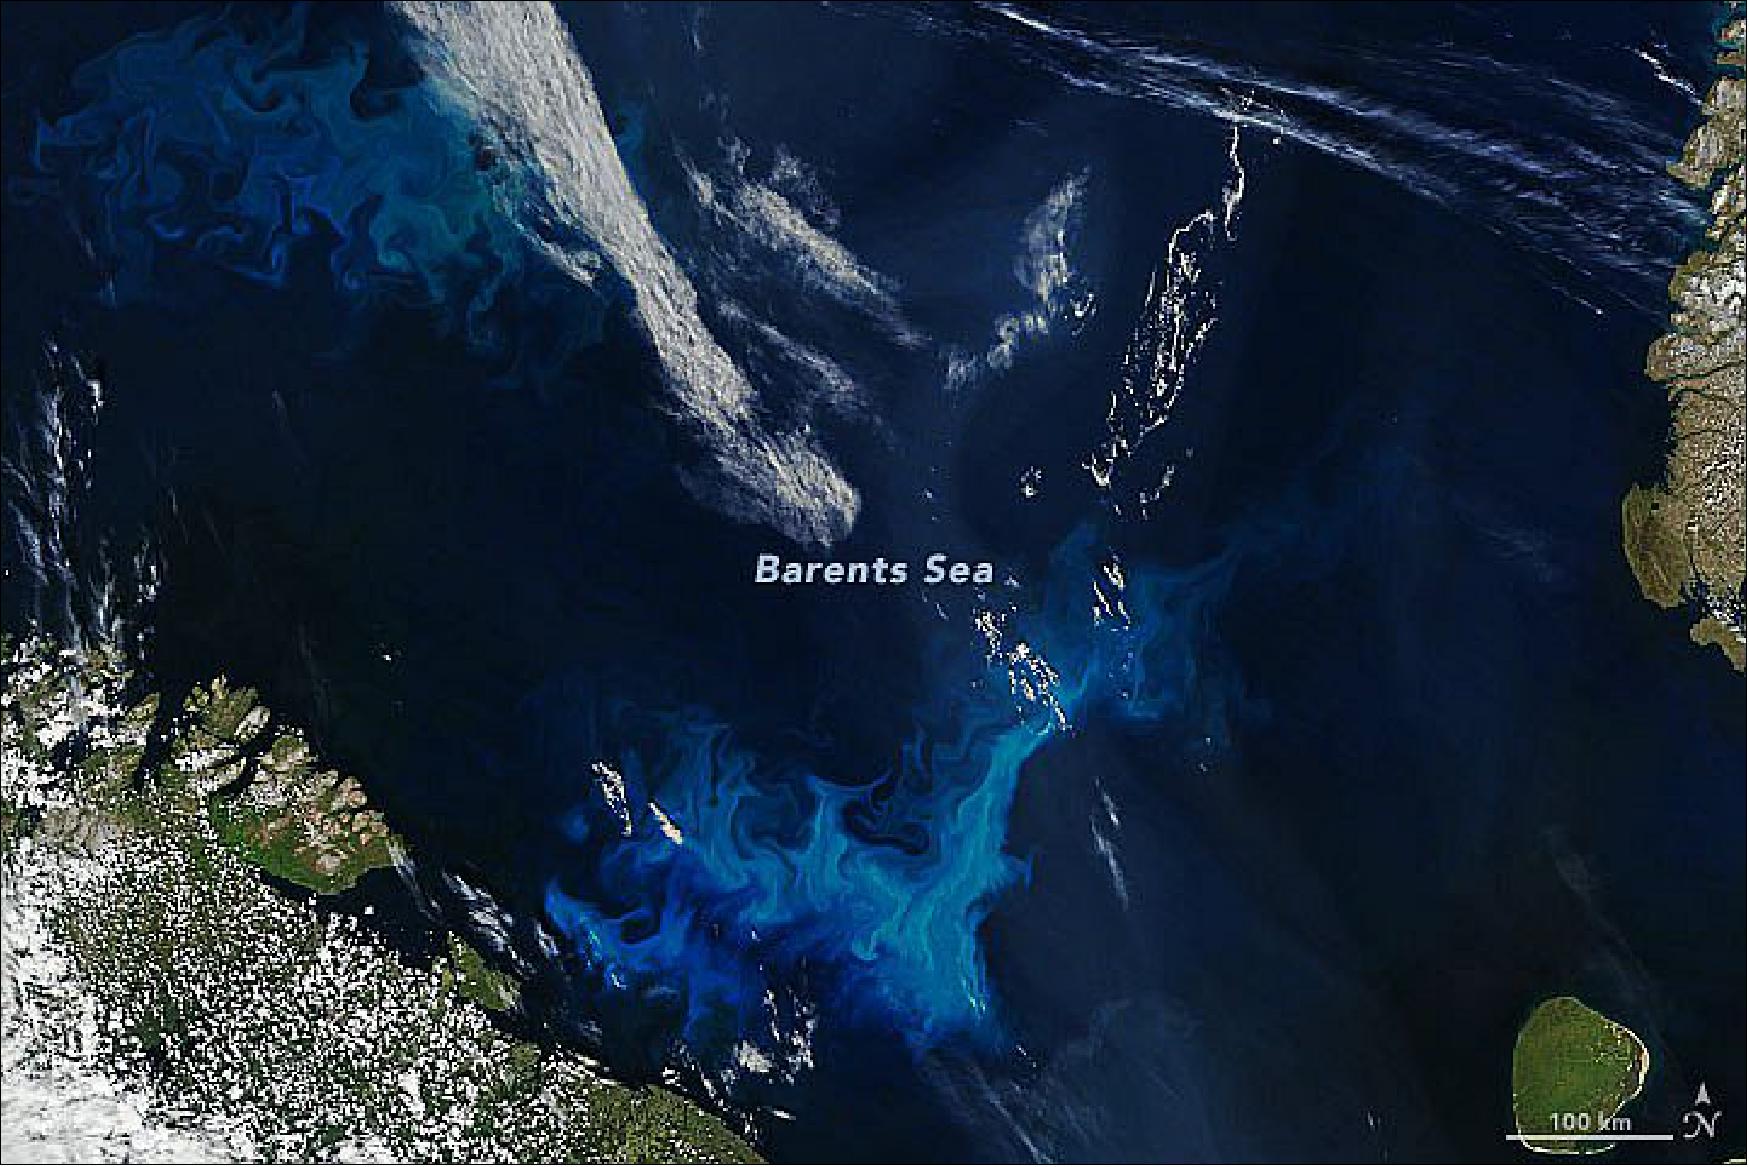 Figure 64: This image, acquired on July 26, 2020 with the Moderate Resolution Imaging Spectroradiometer (MODIS) on NASA's Terra and Aqua satellites, shows a bloom of phytoplankton in the Barents Sea, north of Scandinavia and Russia (image credit: NASA Earth Observatory, images by Joshua Stevens, using MODIS data from NASA EOSDIS/LANCE and GIBS/Worldview and data courtesy of Lewis, K. M., van Dijken, G. L., & Arrigo, K. R. (2020). Story by Kathryn Hansen)